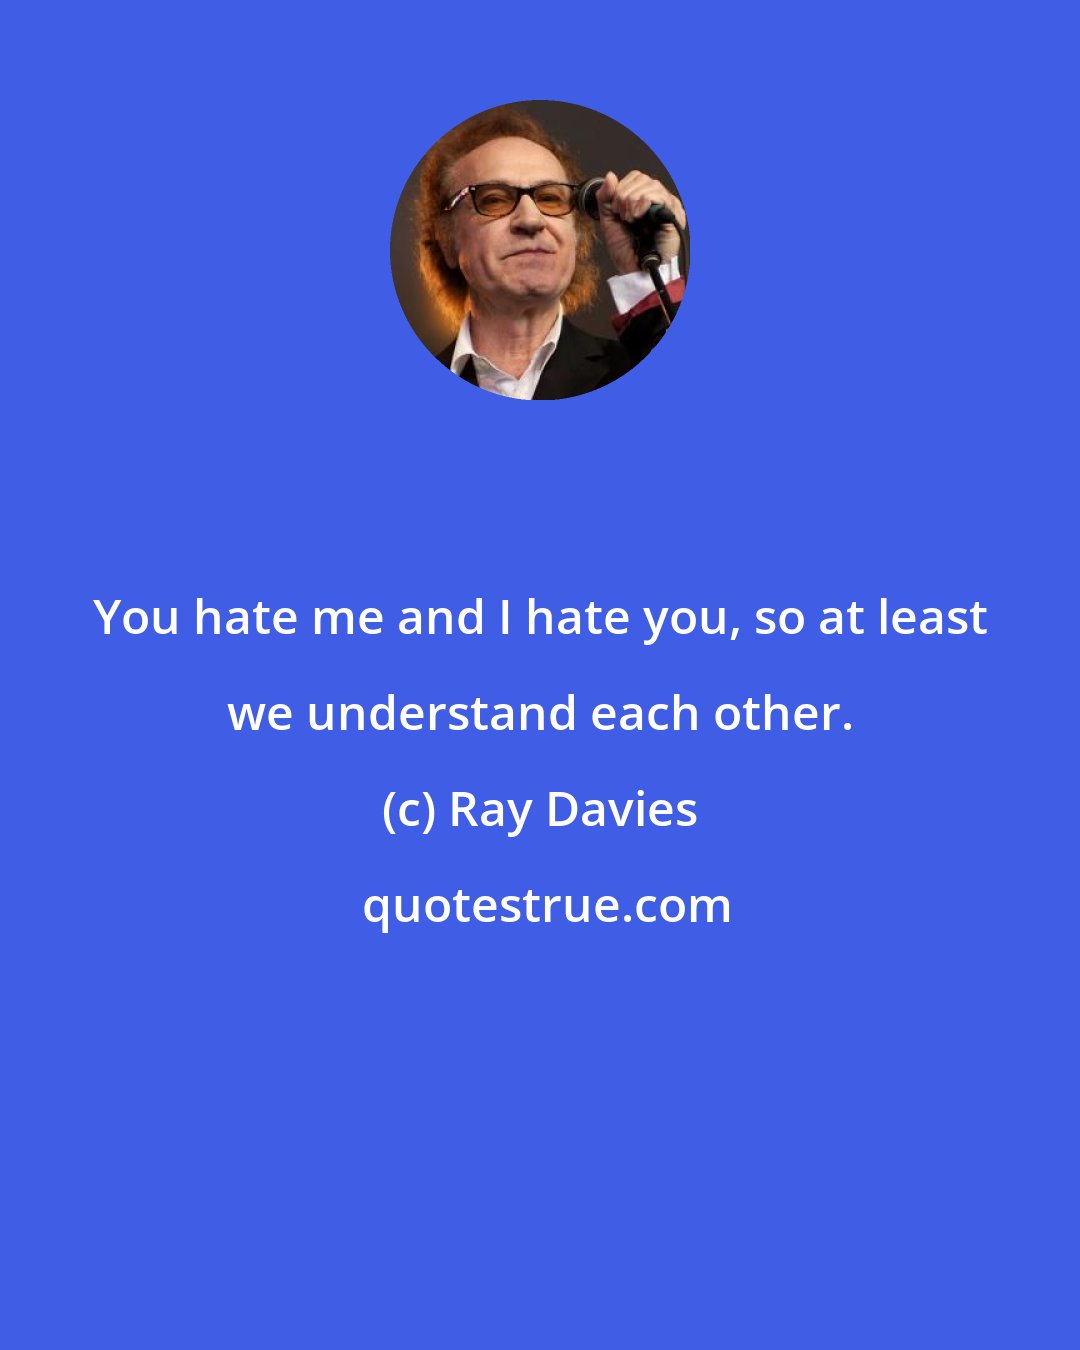 Ray Davies: You hate me and I hate you, so at least we understand each other.